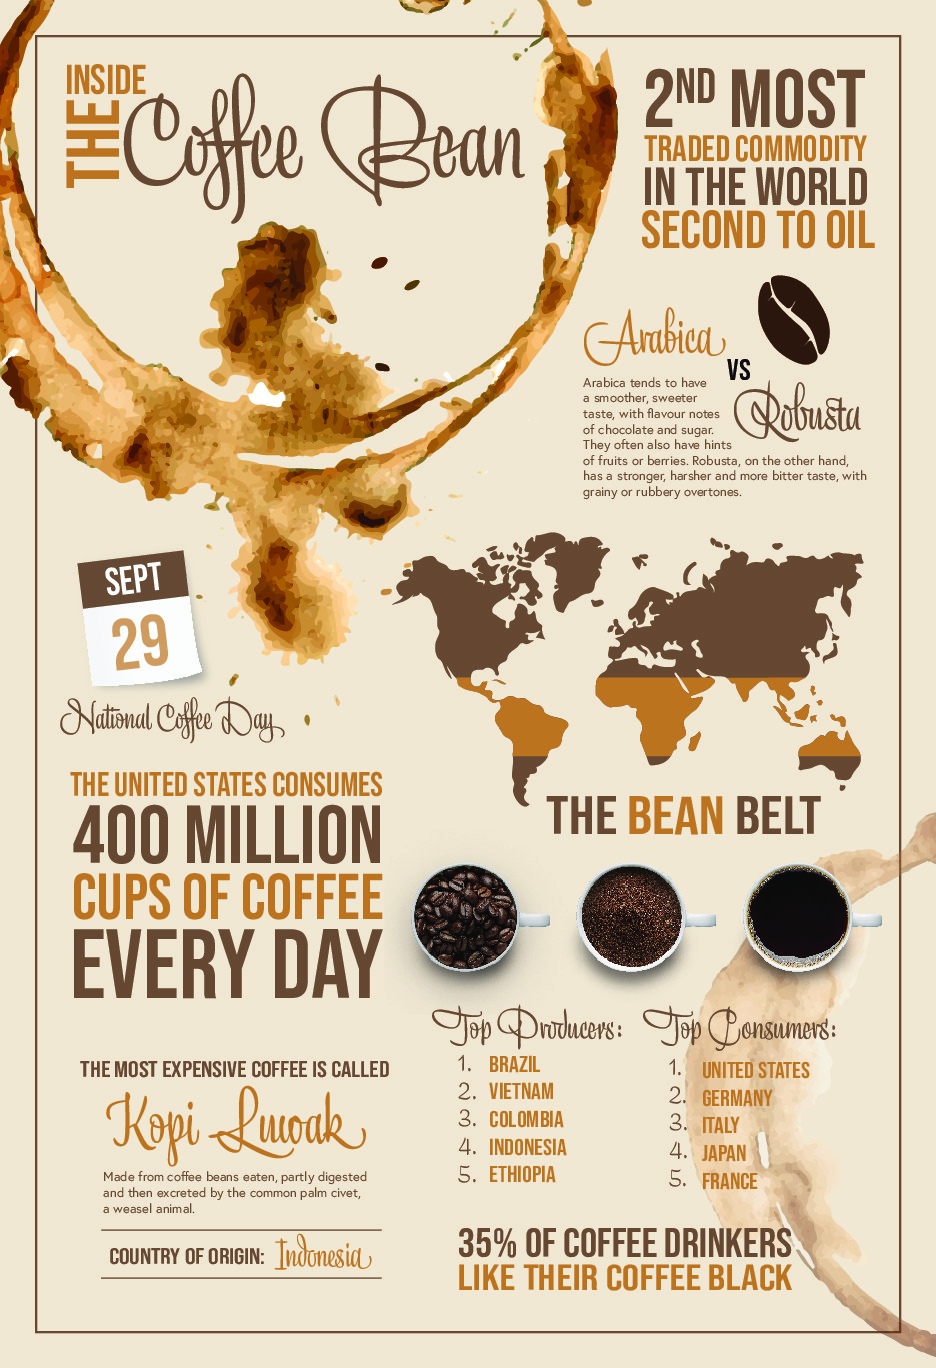 Poster talking about coffee, with a coffee ring, map of where coffee comes from and other facts about coffee